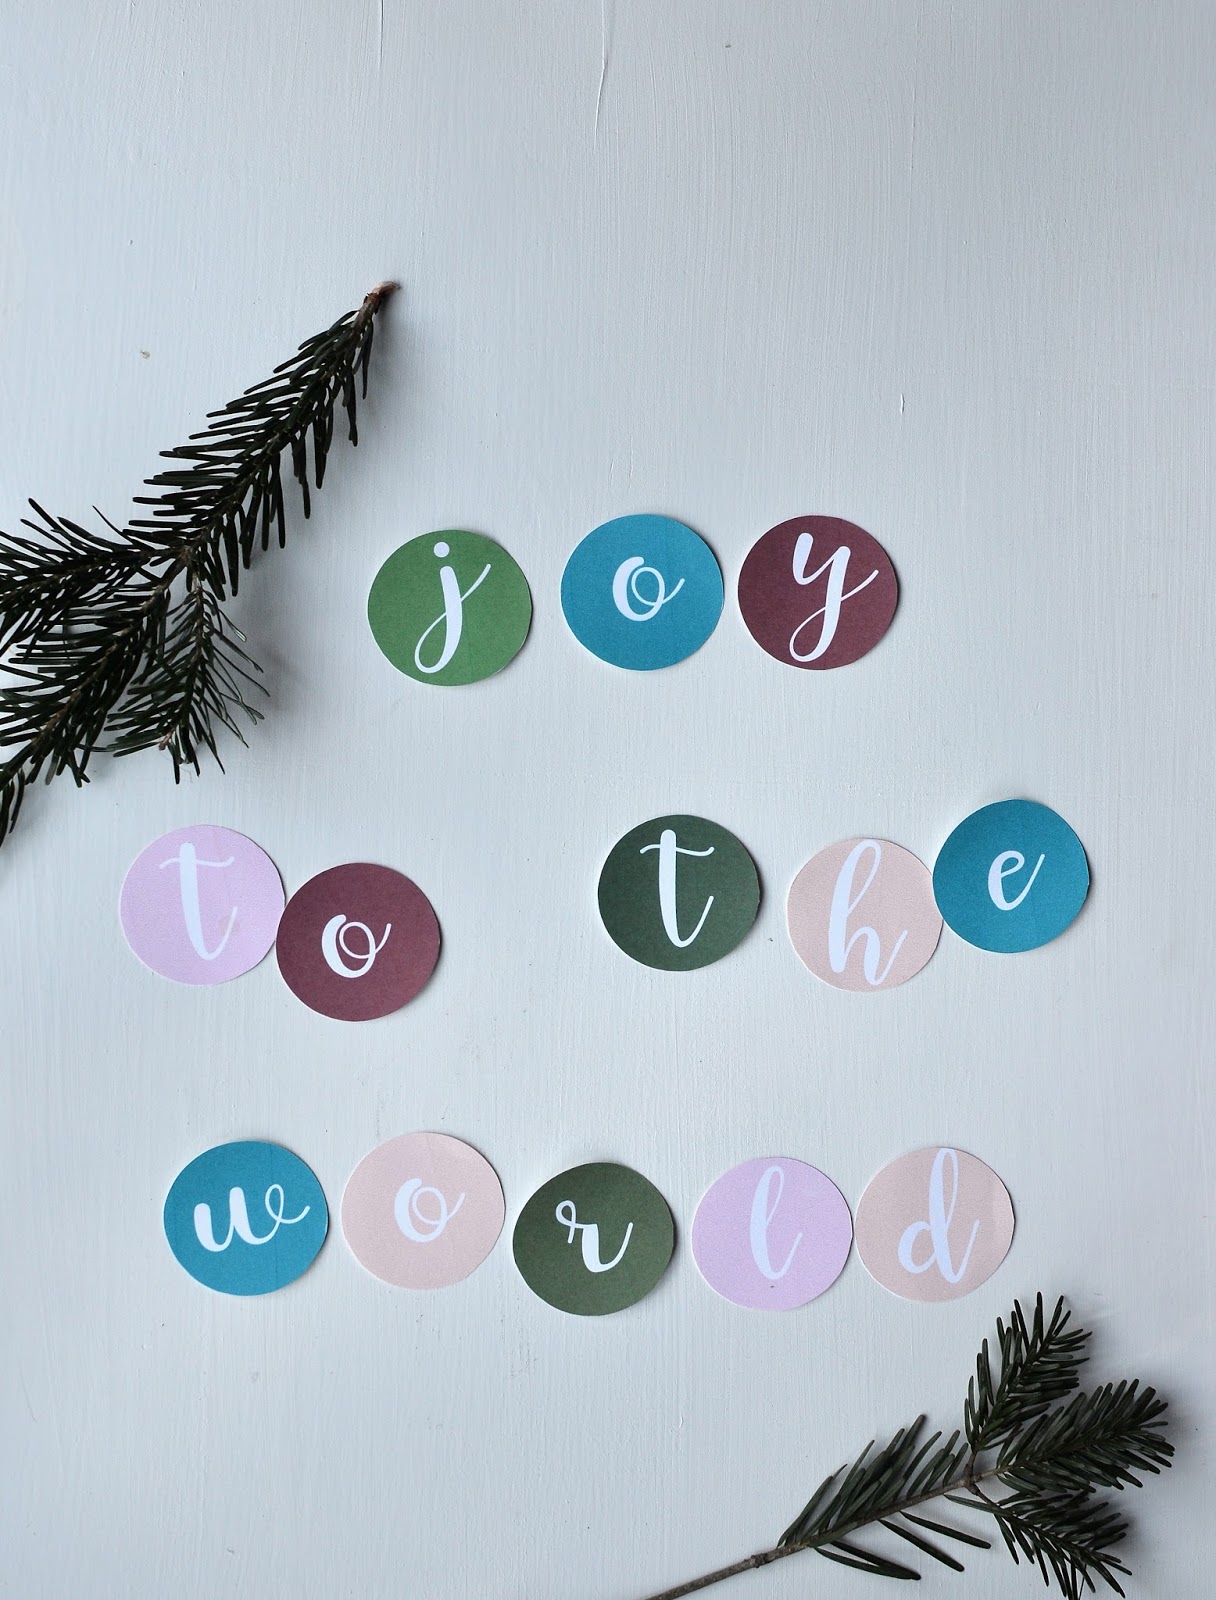 Joy to the World Free Print and Cut file